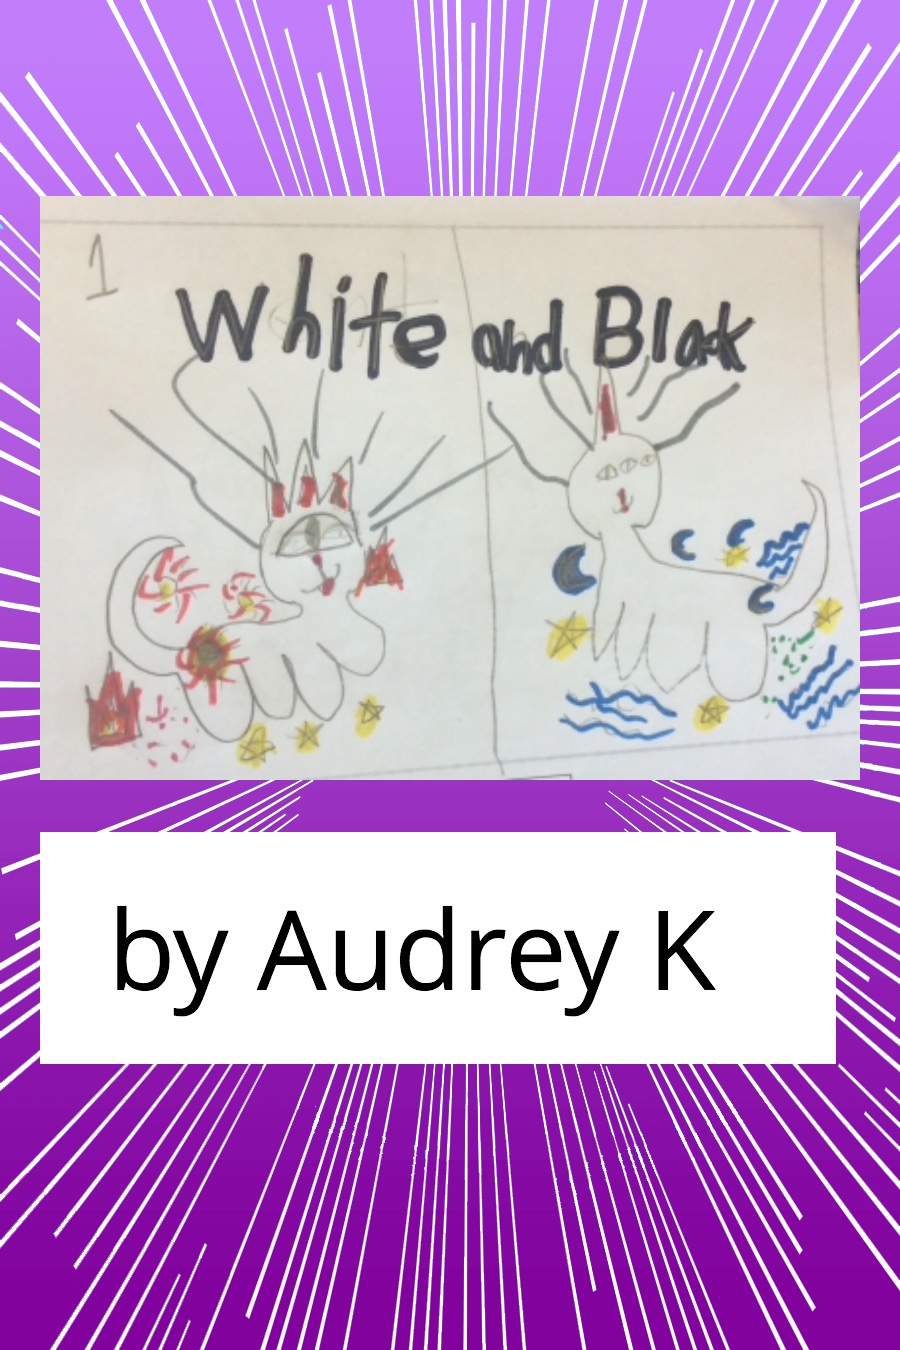 White and Black by Audrey K